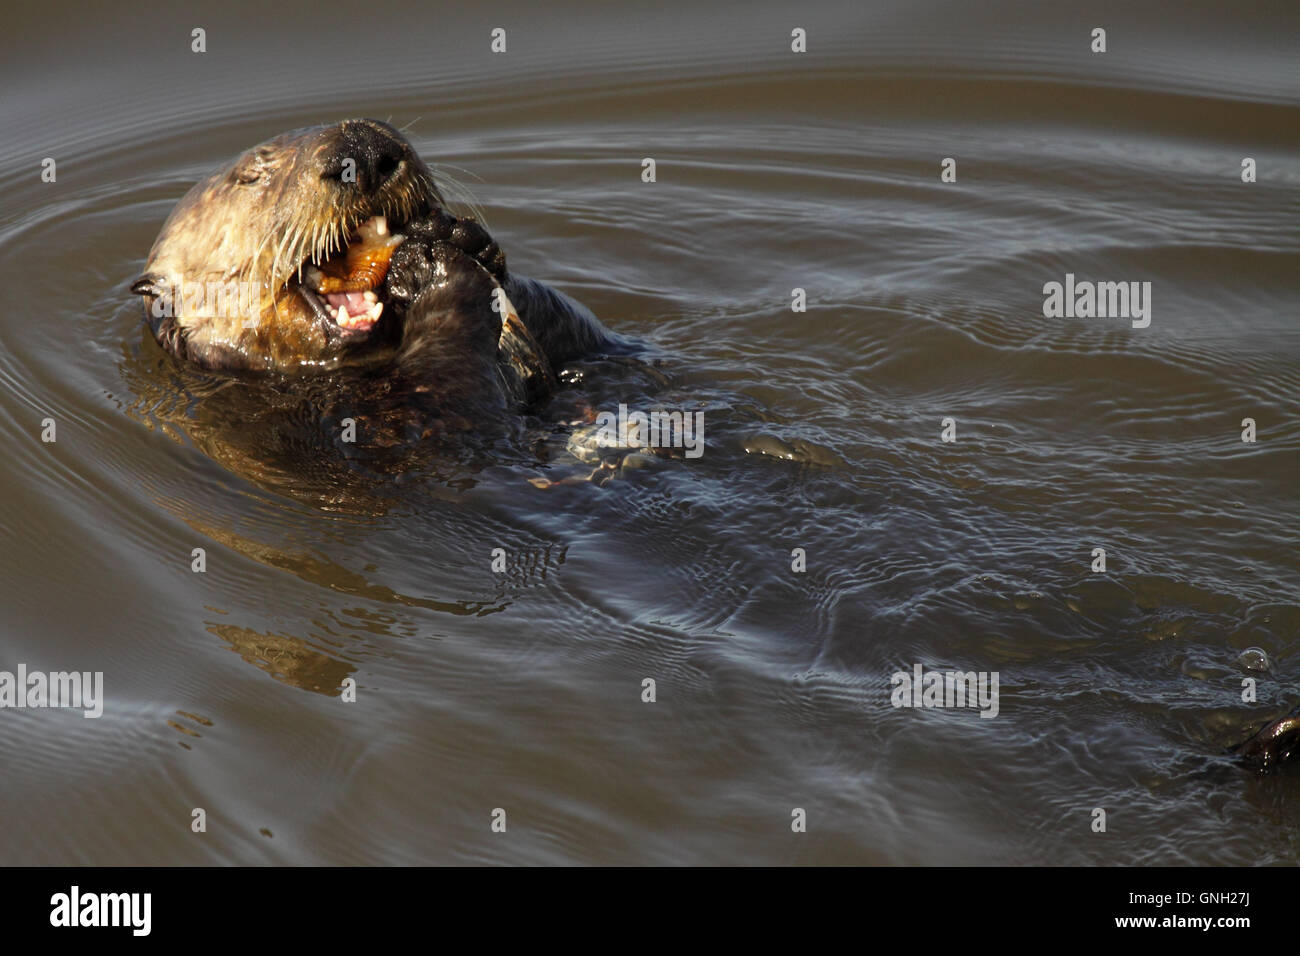 A Sea Otter eating a clam while floating in the Pacific Ocean. Stock Photo